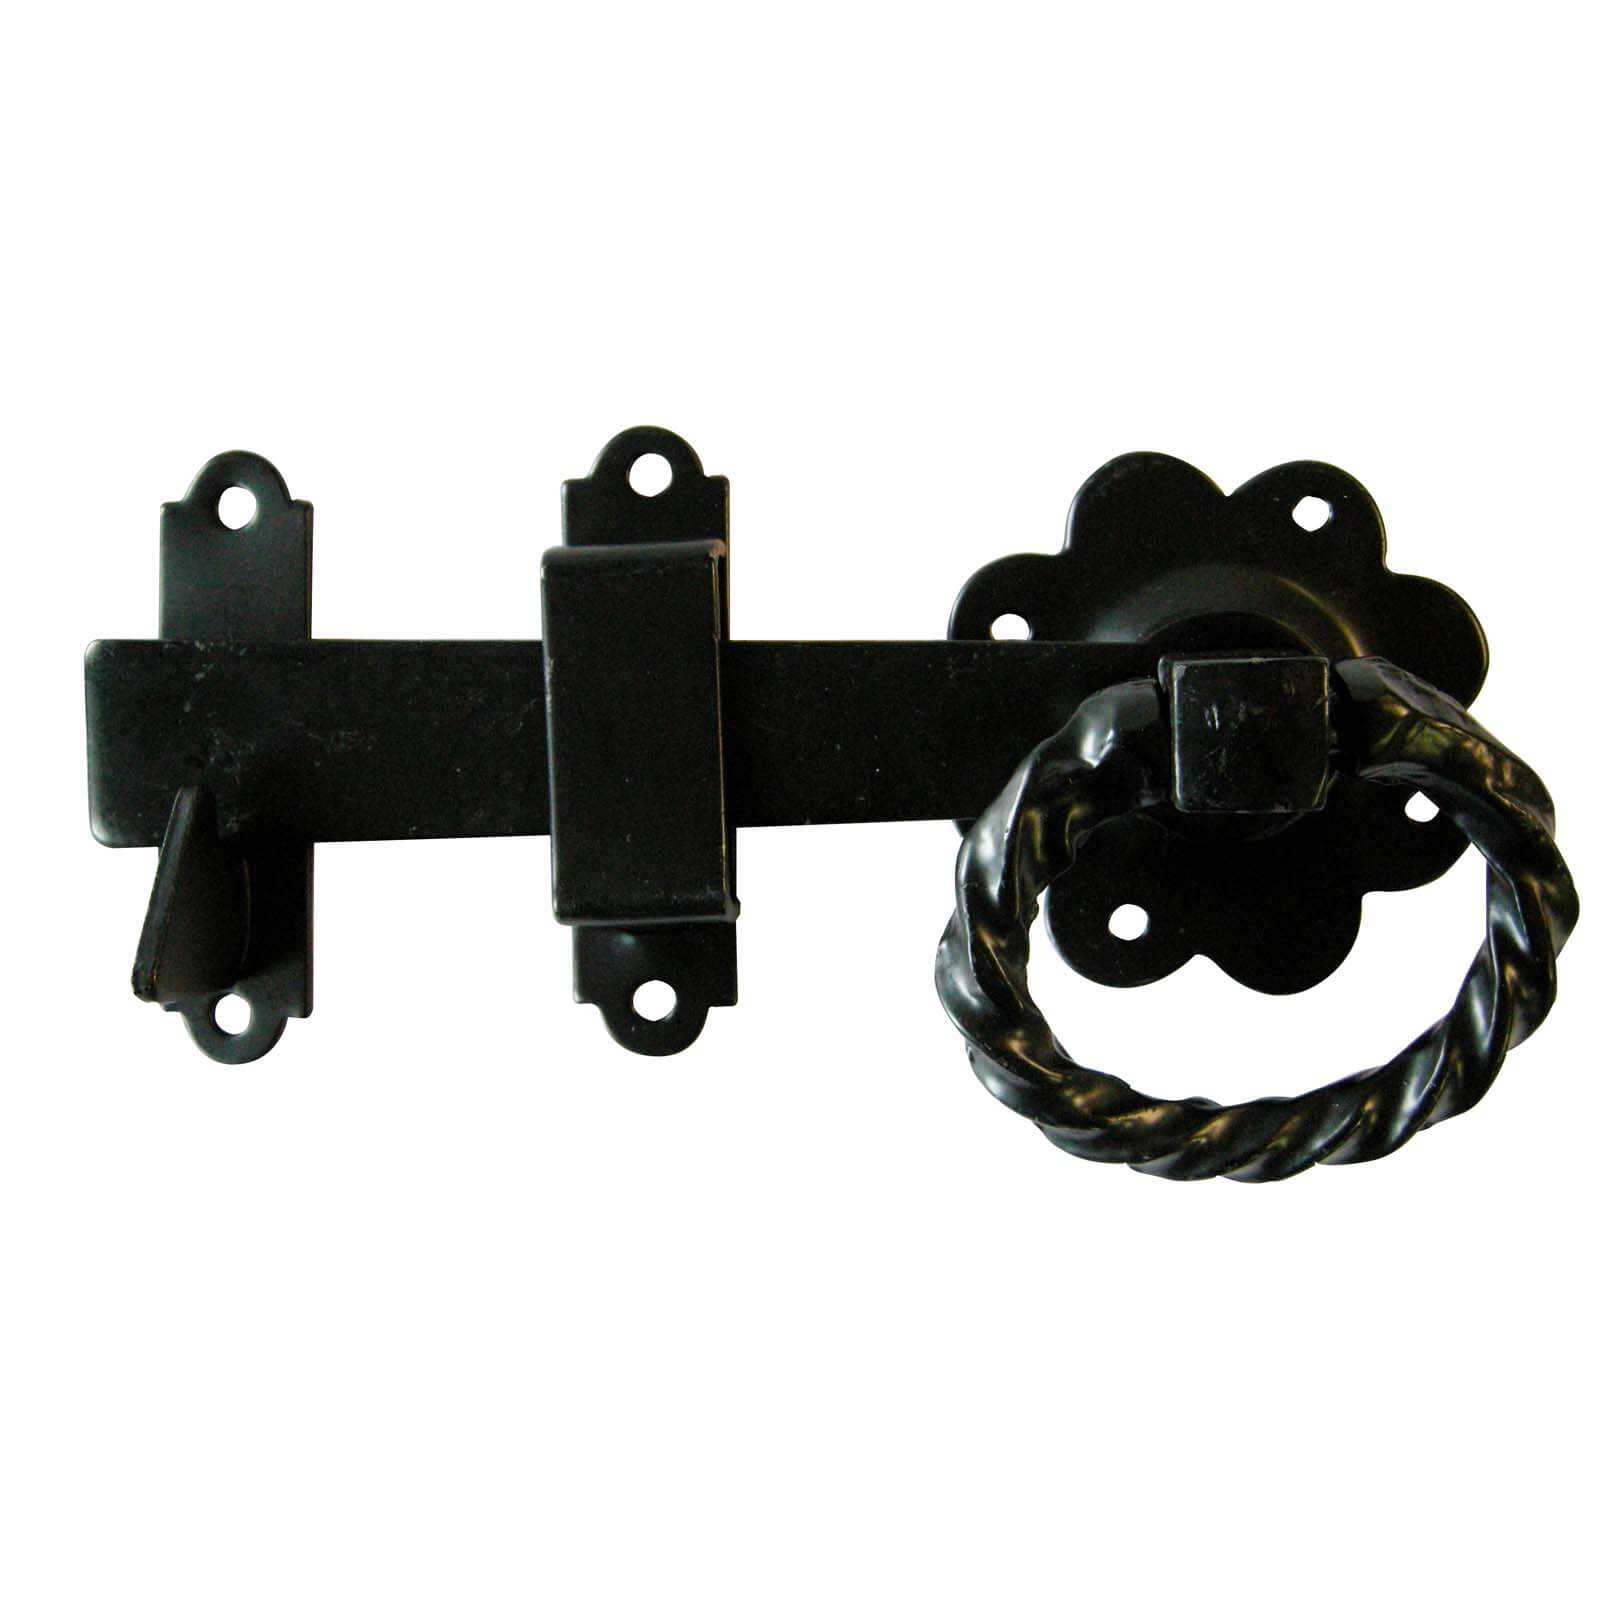 Photo of Twisted Ring Handled Gate Latch - Black - 152mm